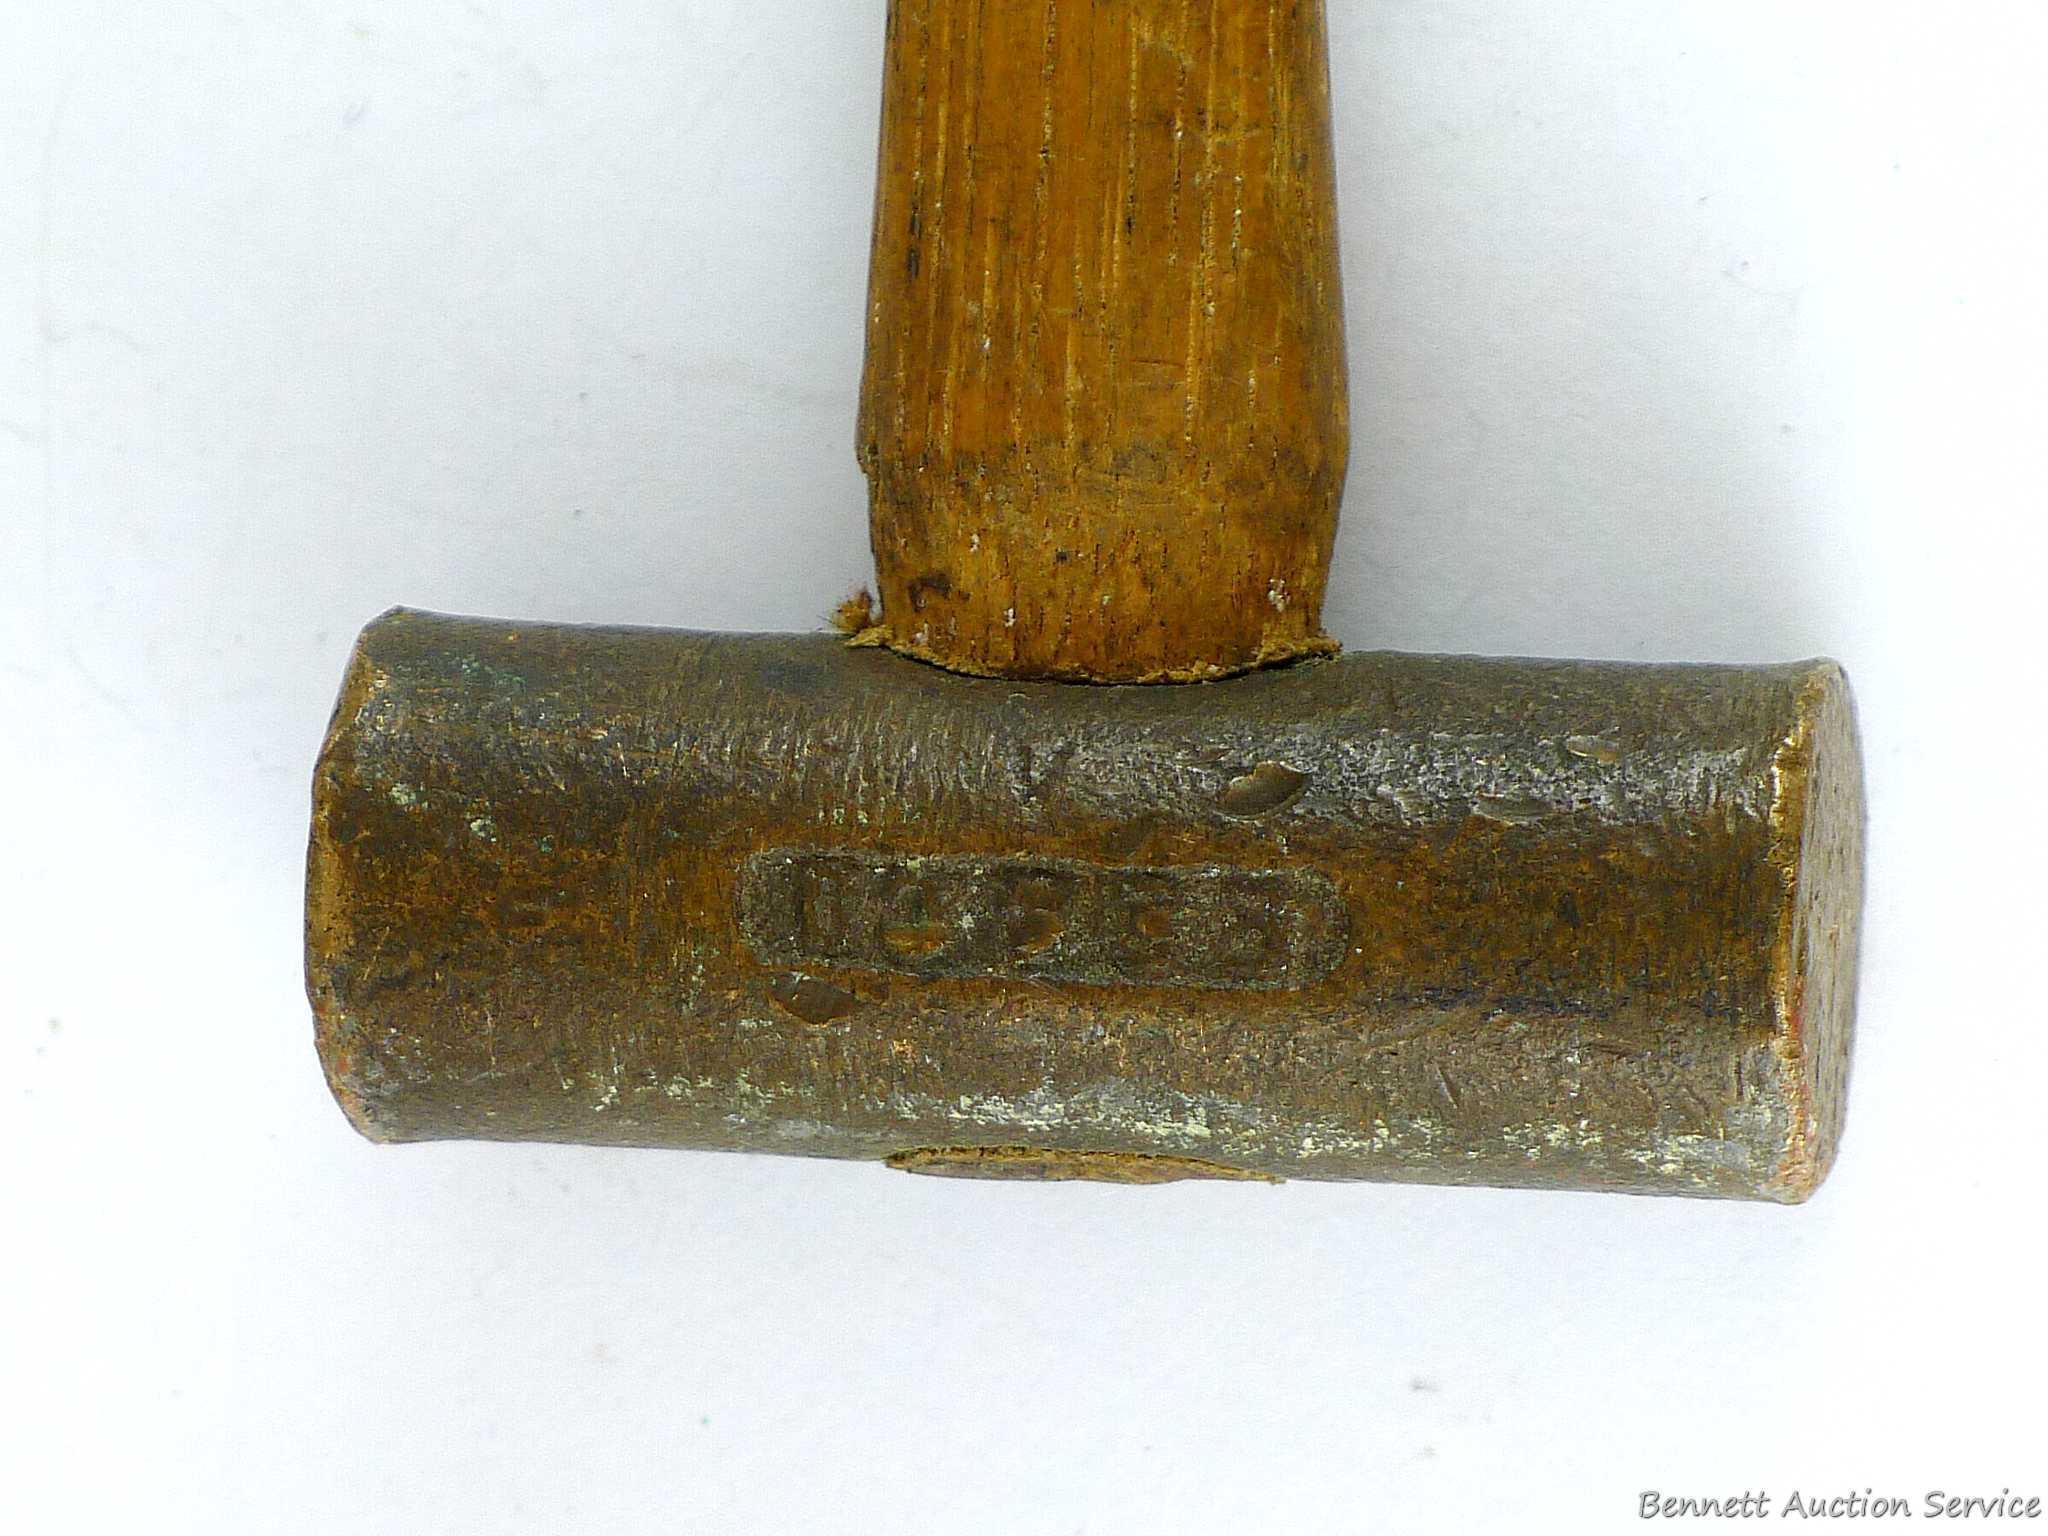 Cute little hammer with a brass head measures 7-3/4" overall. Brass head is nearly 3" wide.